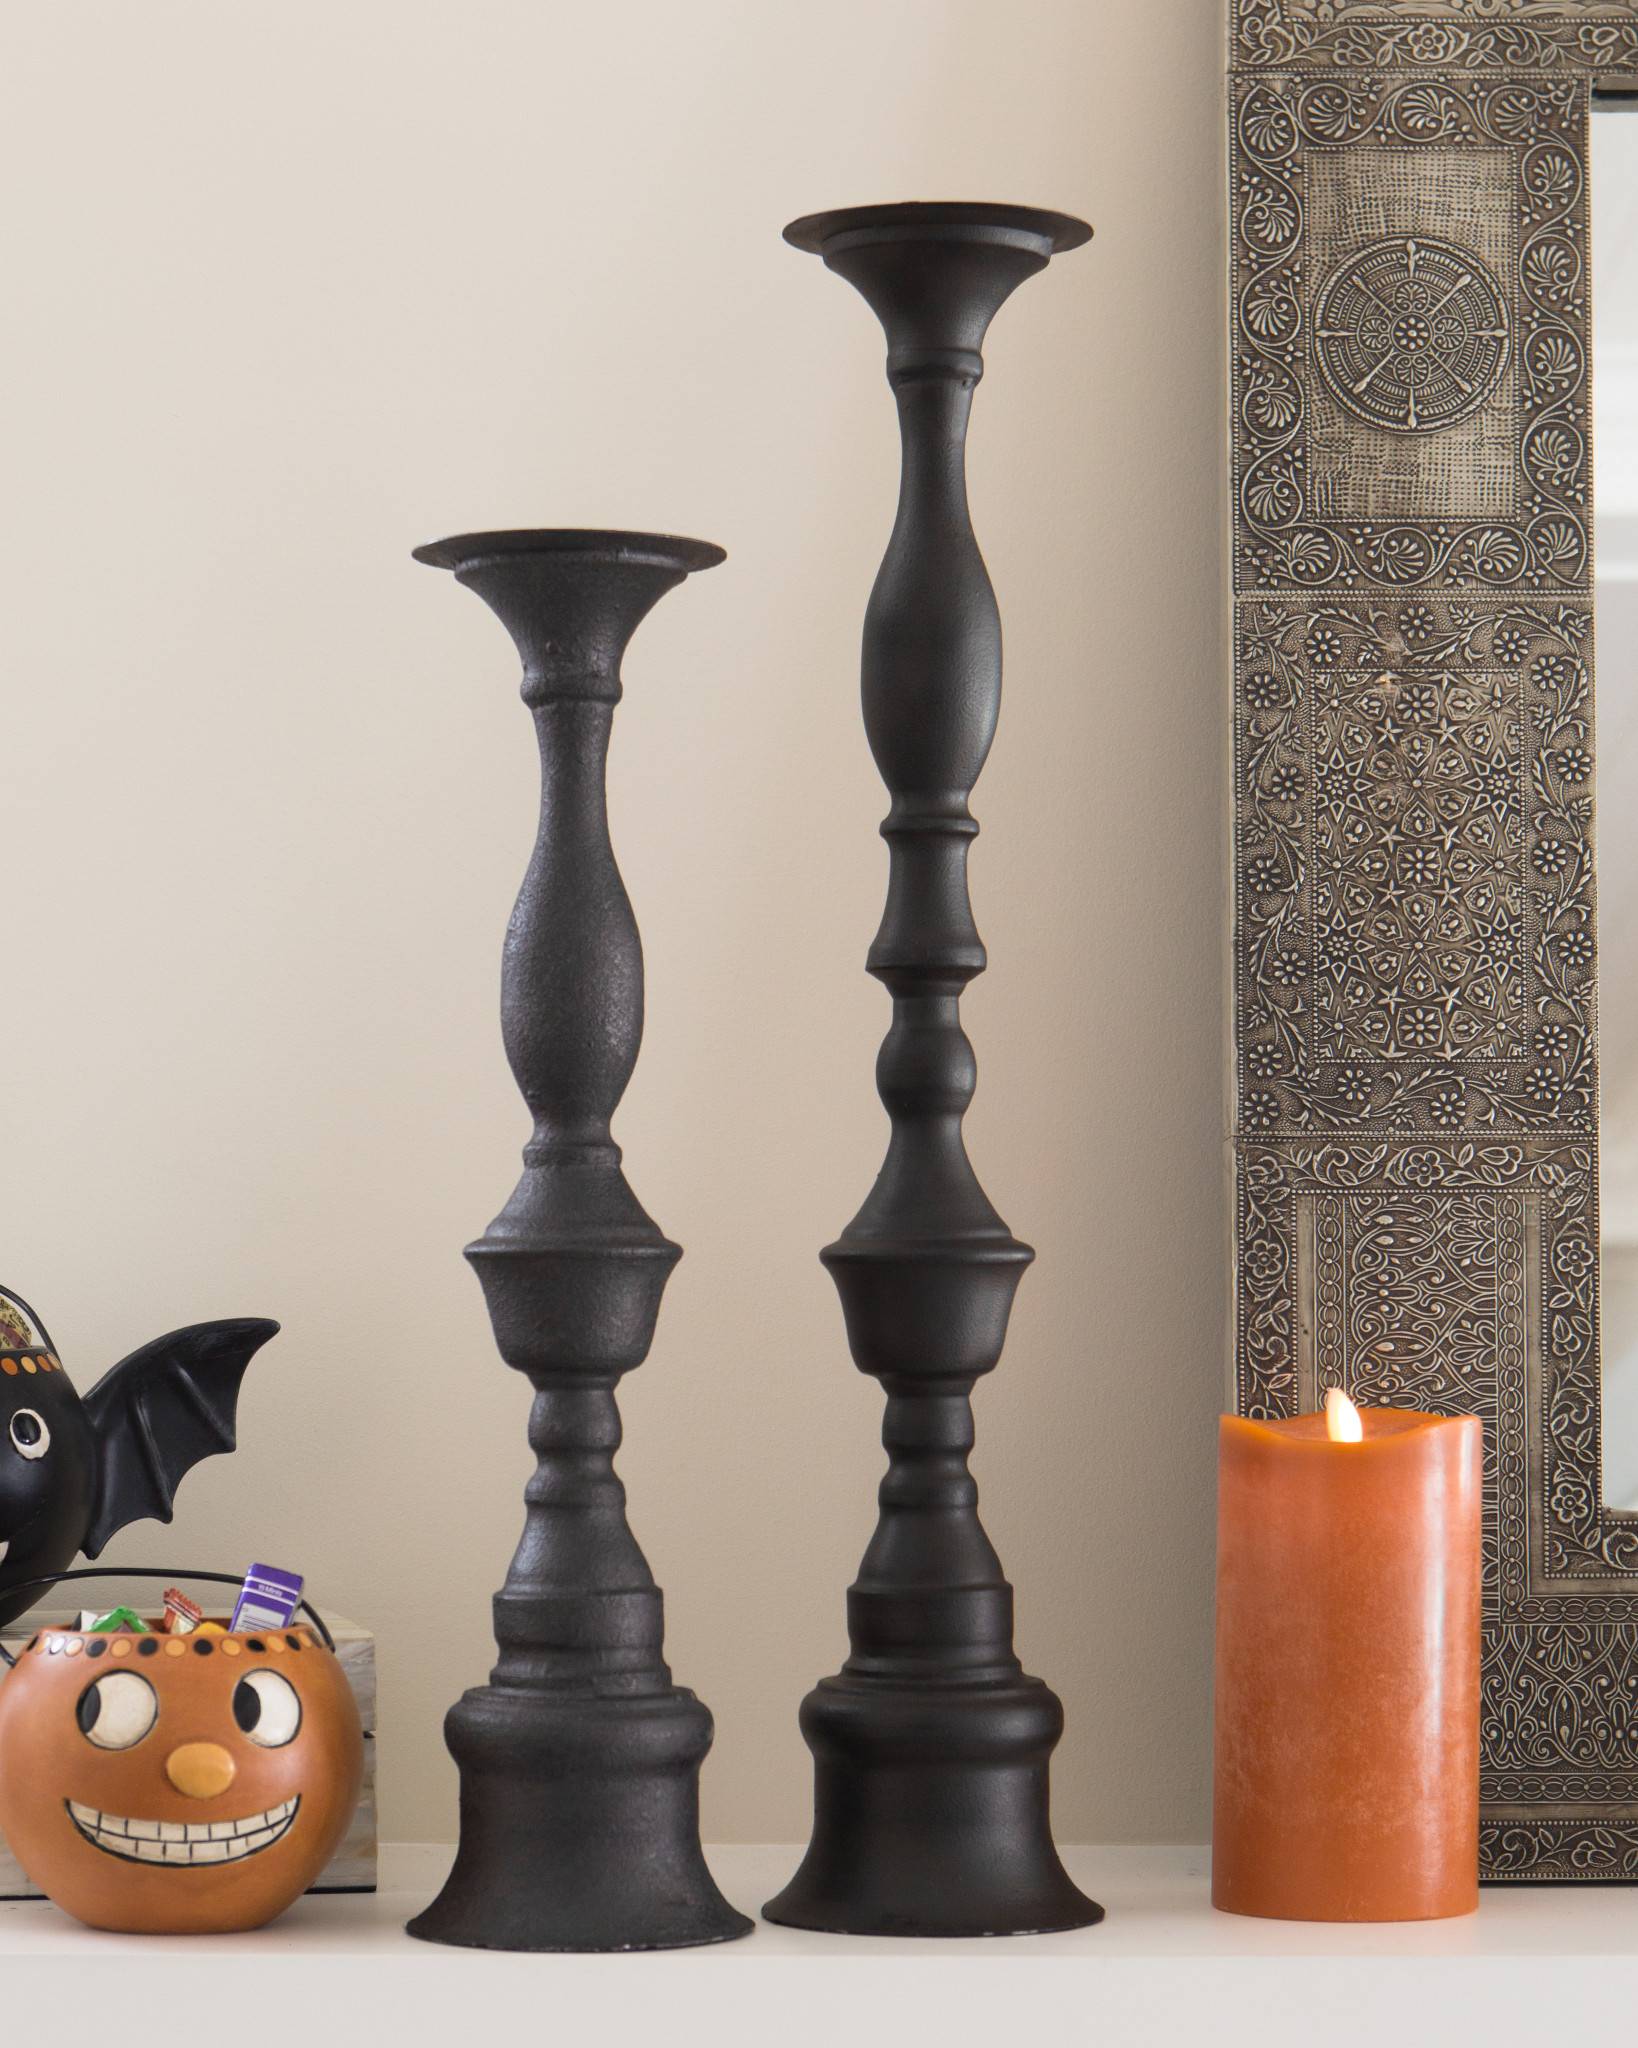 Wrought Iron Candle Holders, Set of 2 | Balsam Hill